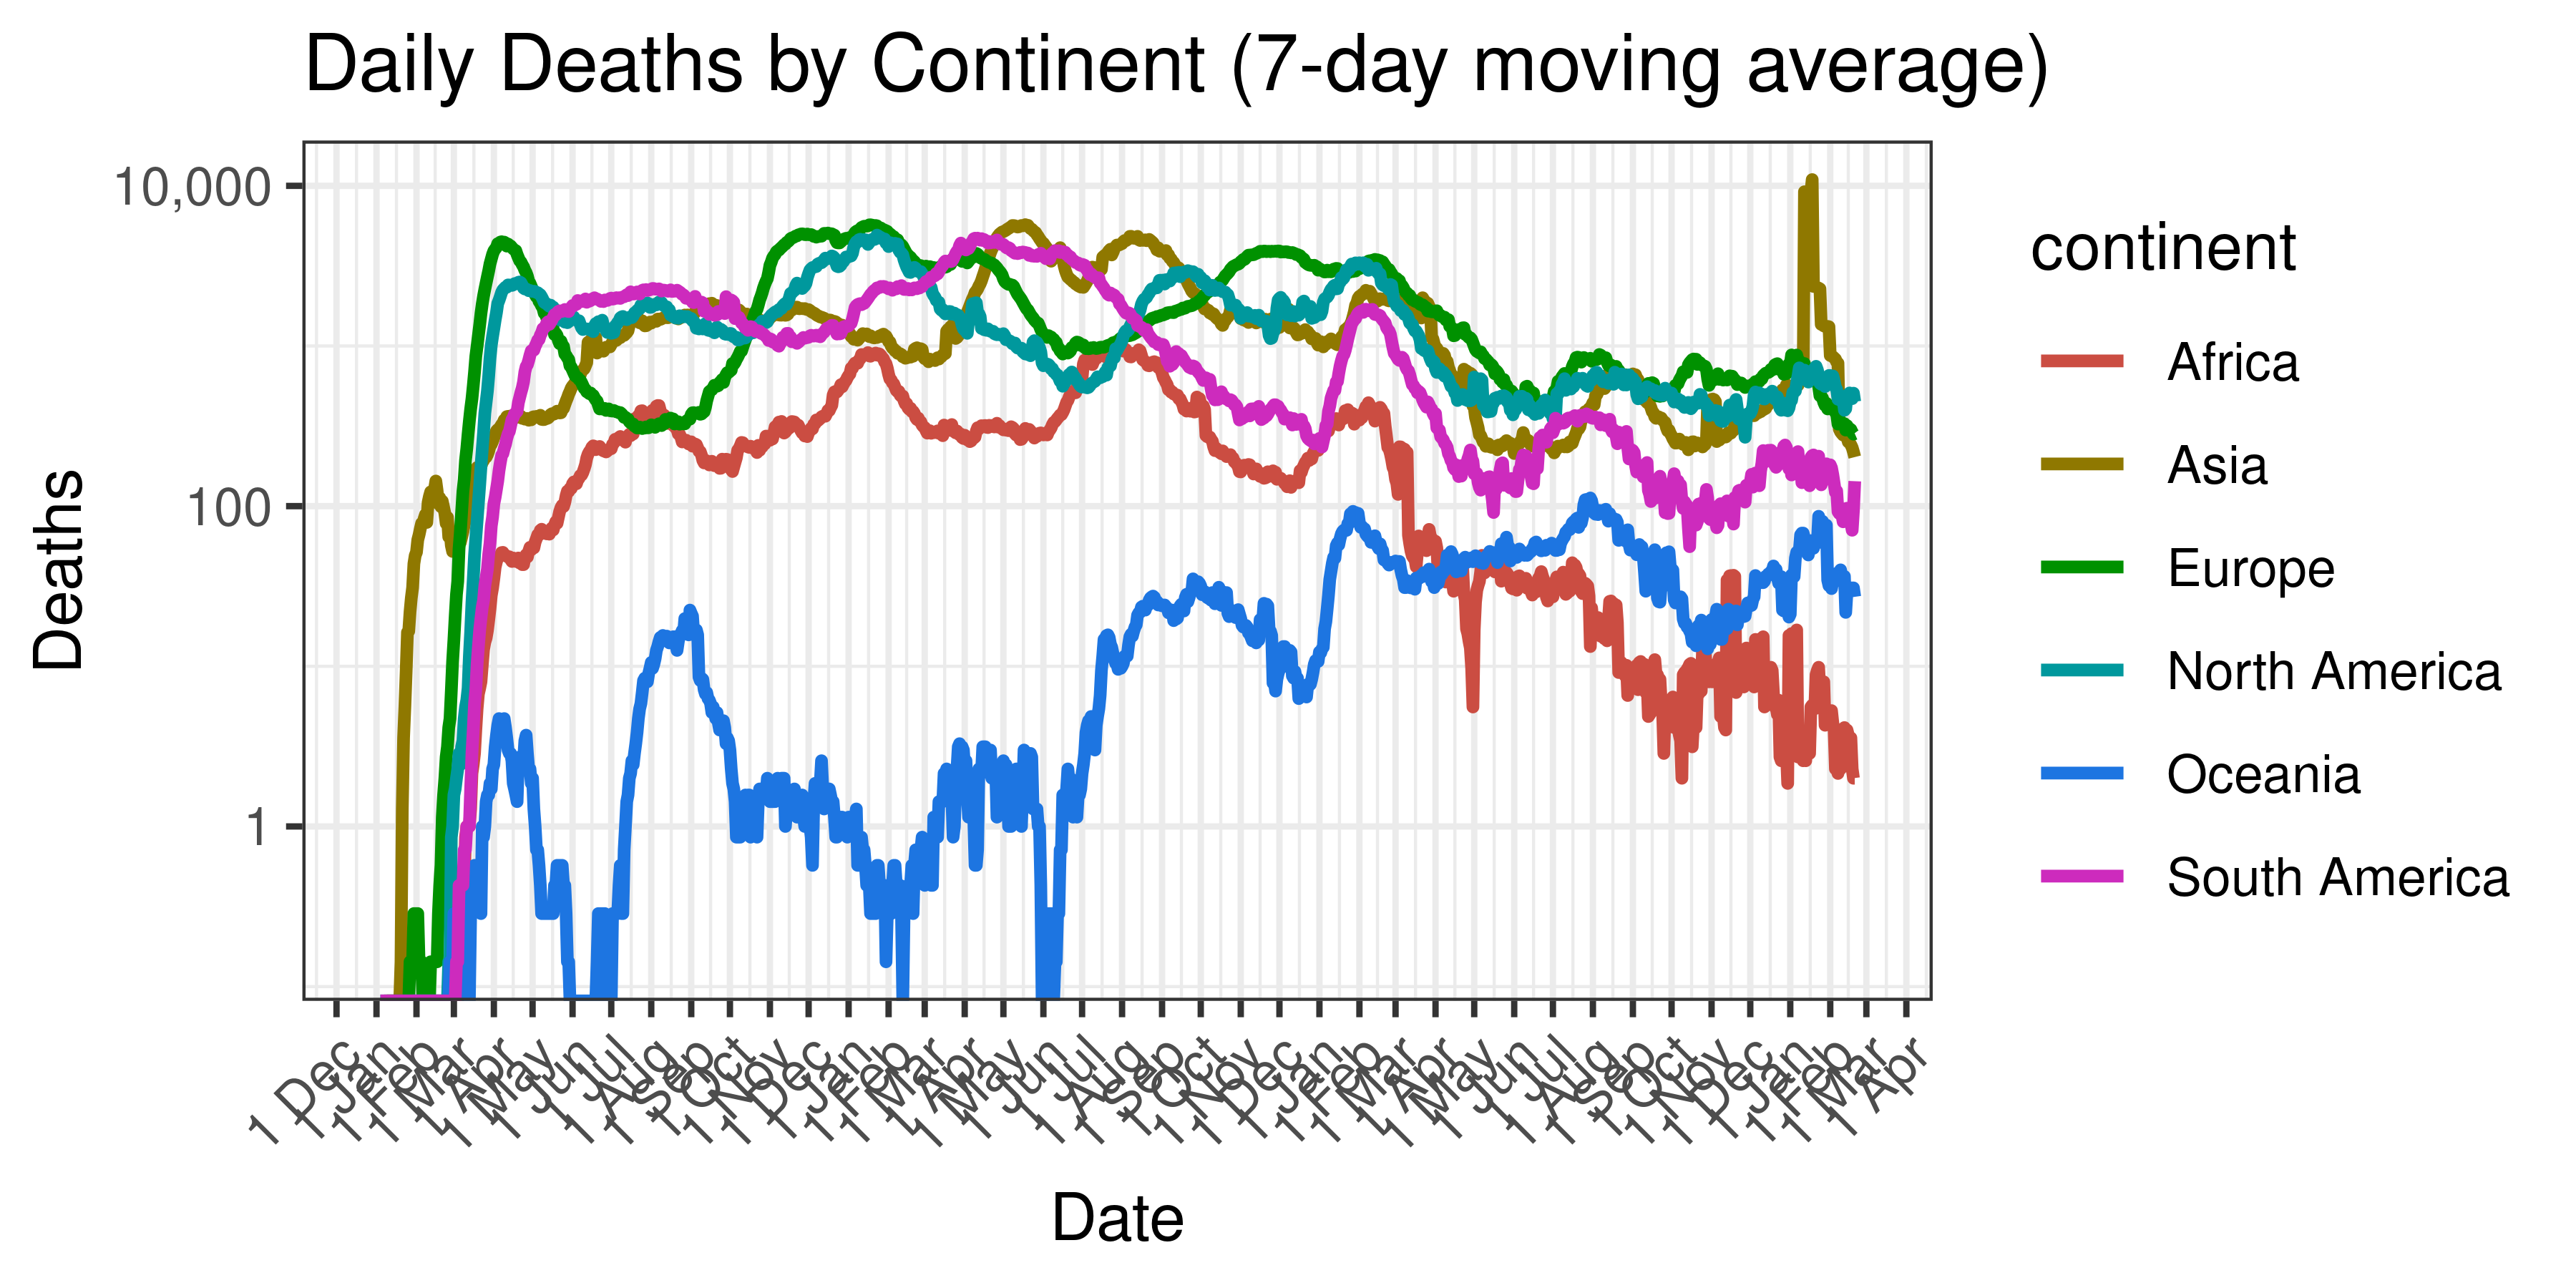 Daily Deaths by Continent (7-day moving average)